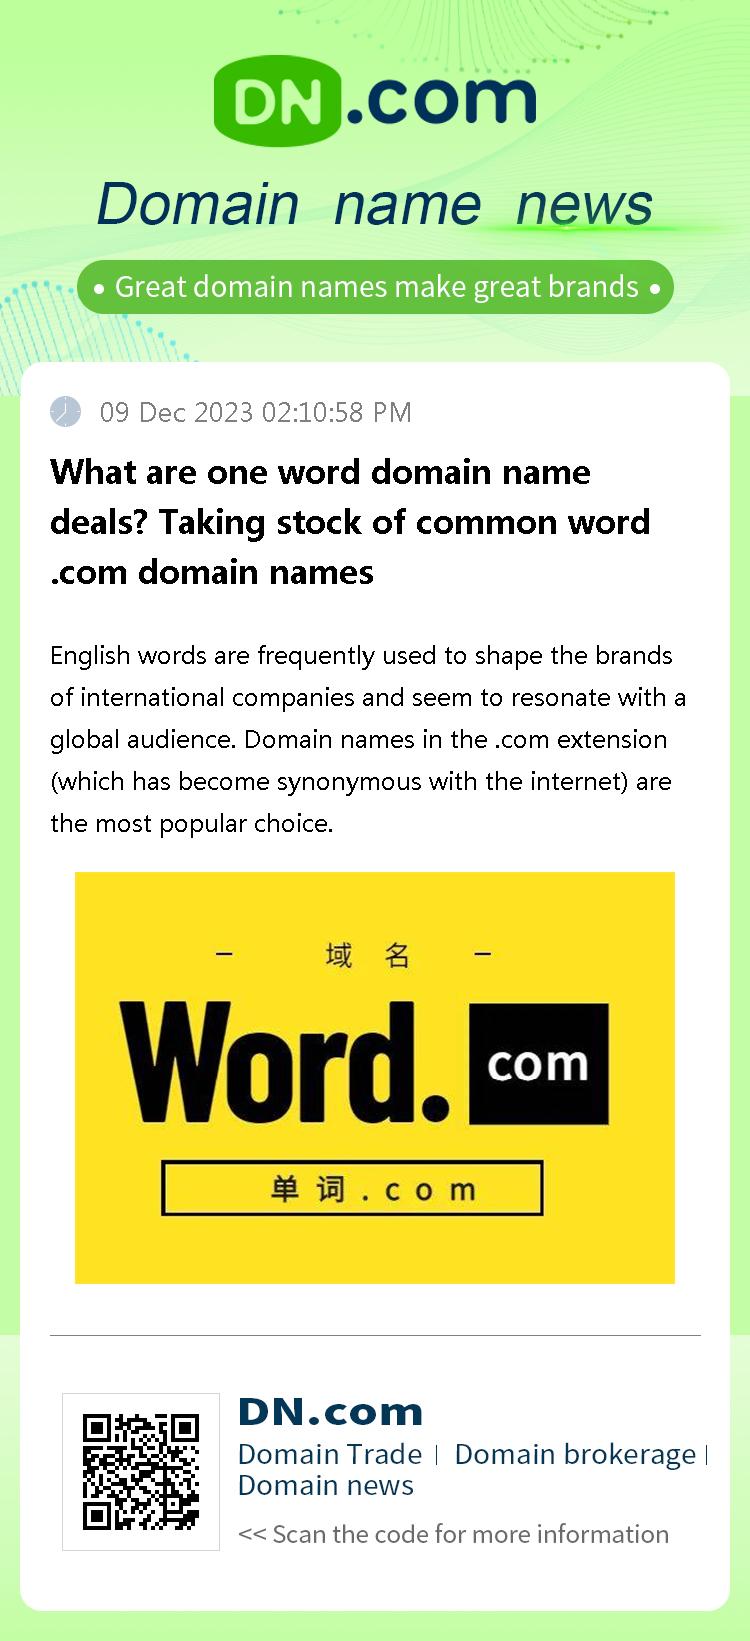 What are one word domain name deals? Taking stock of common word .com domain names